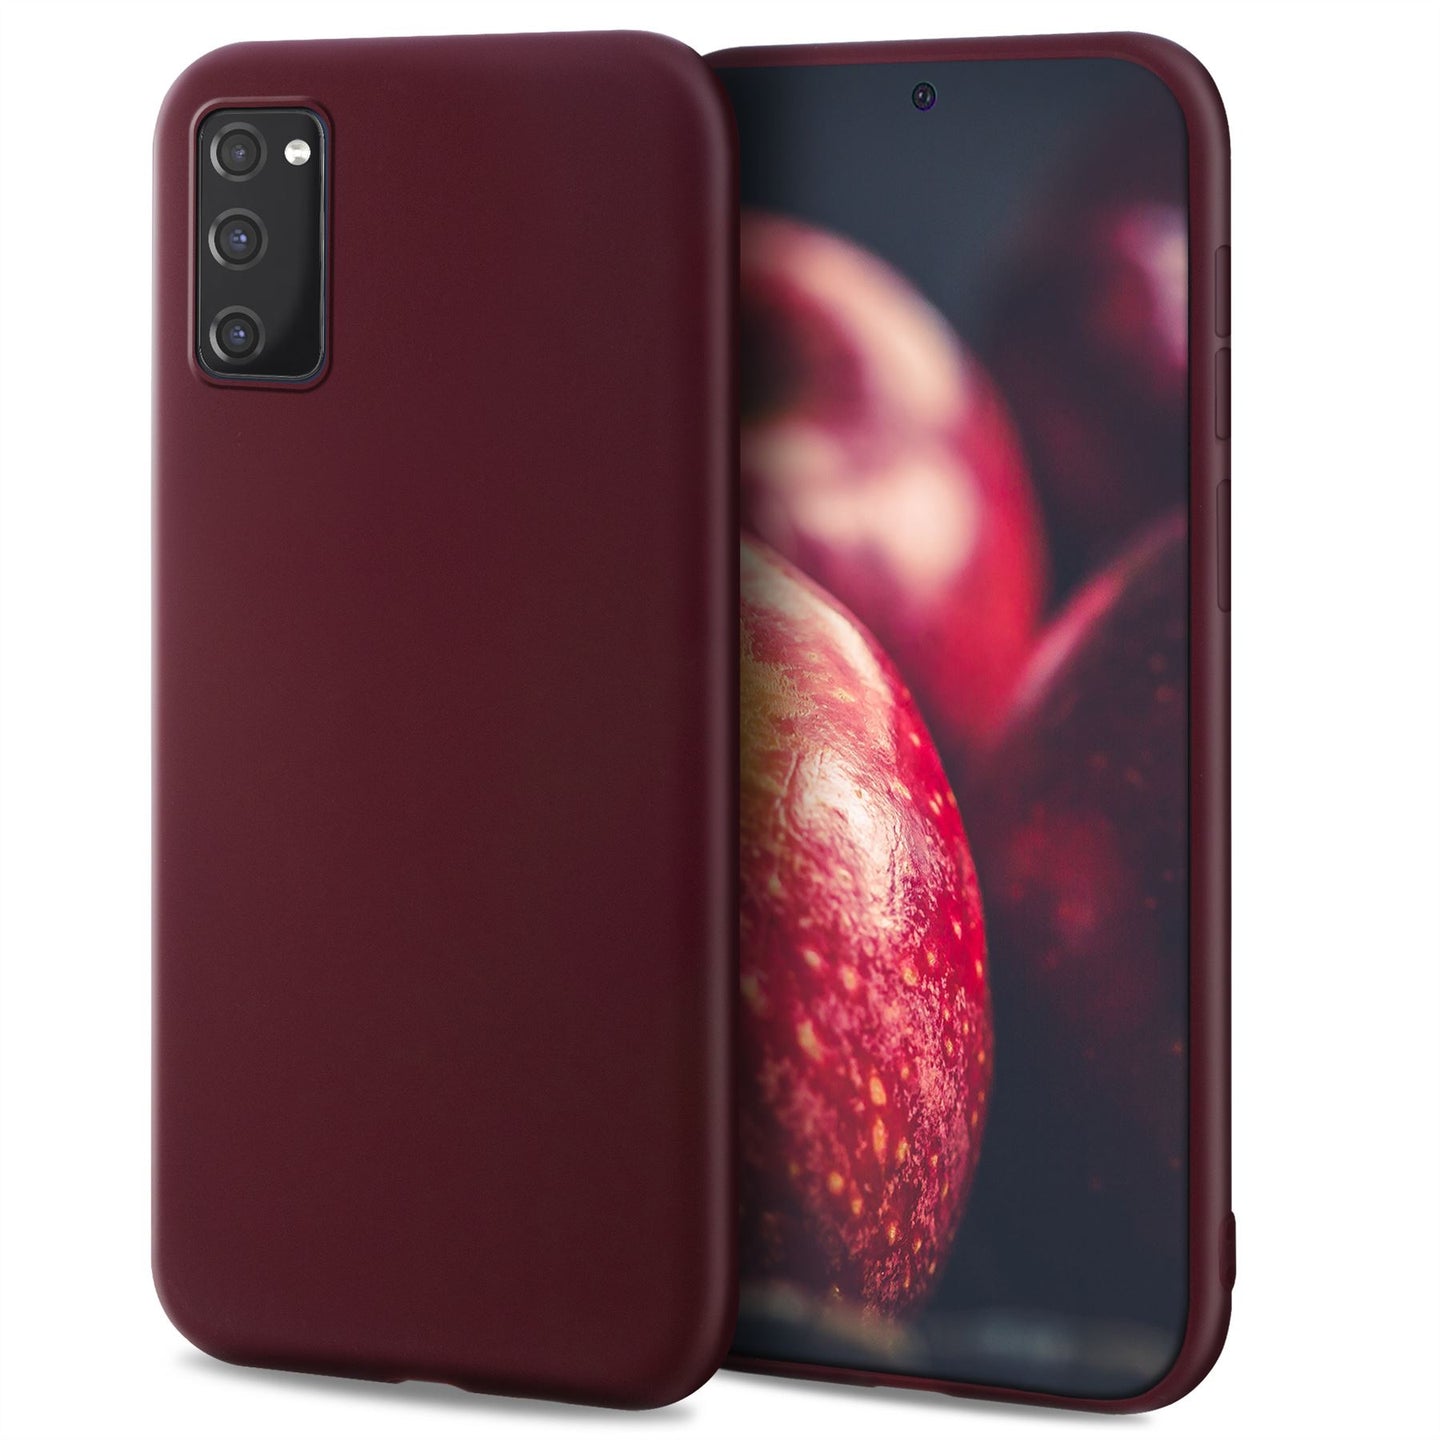 Moozy Minimalist Series Silicone Case for Samsung S20 FE, Wine Red - Matte Finish Slim Soft TPU Cover